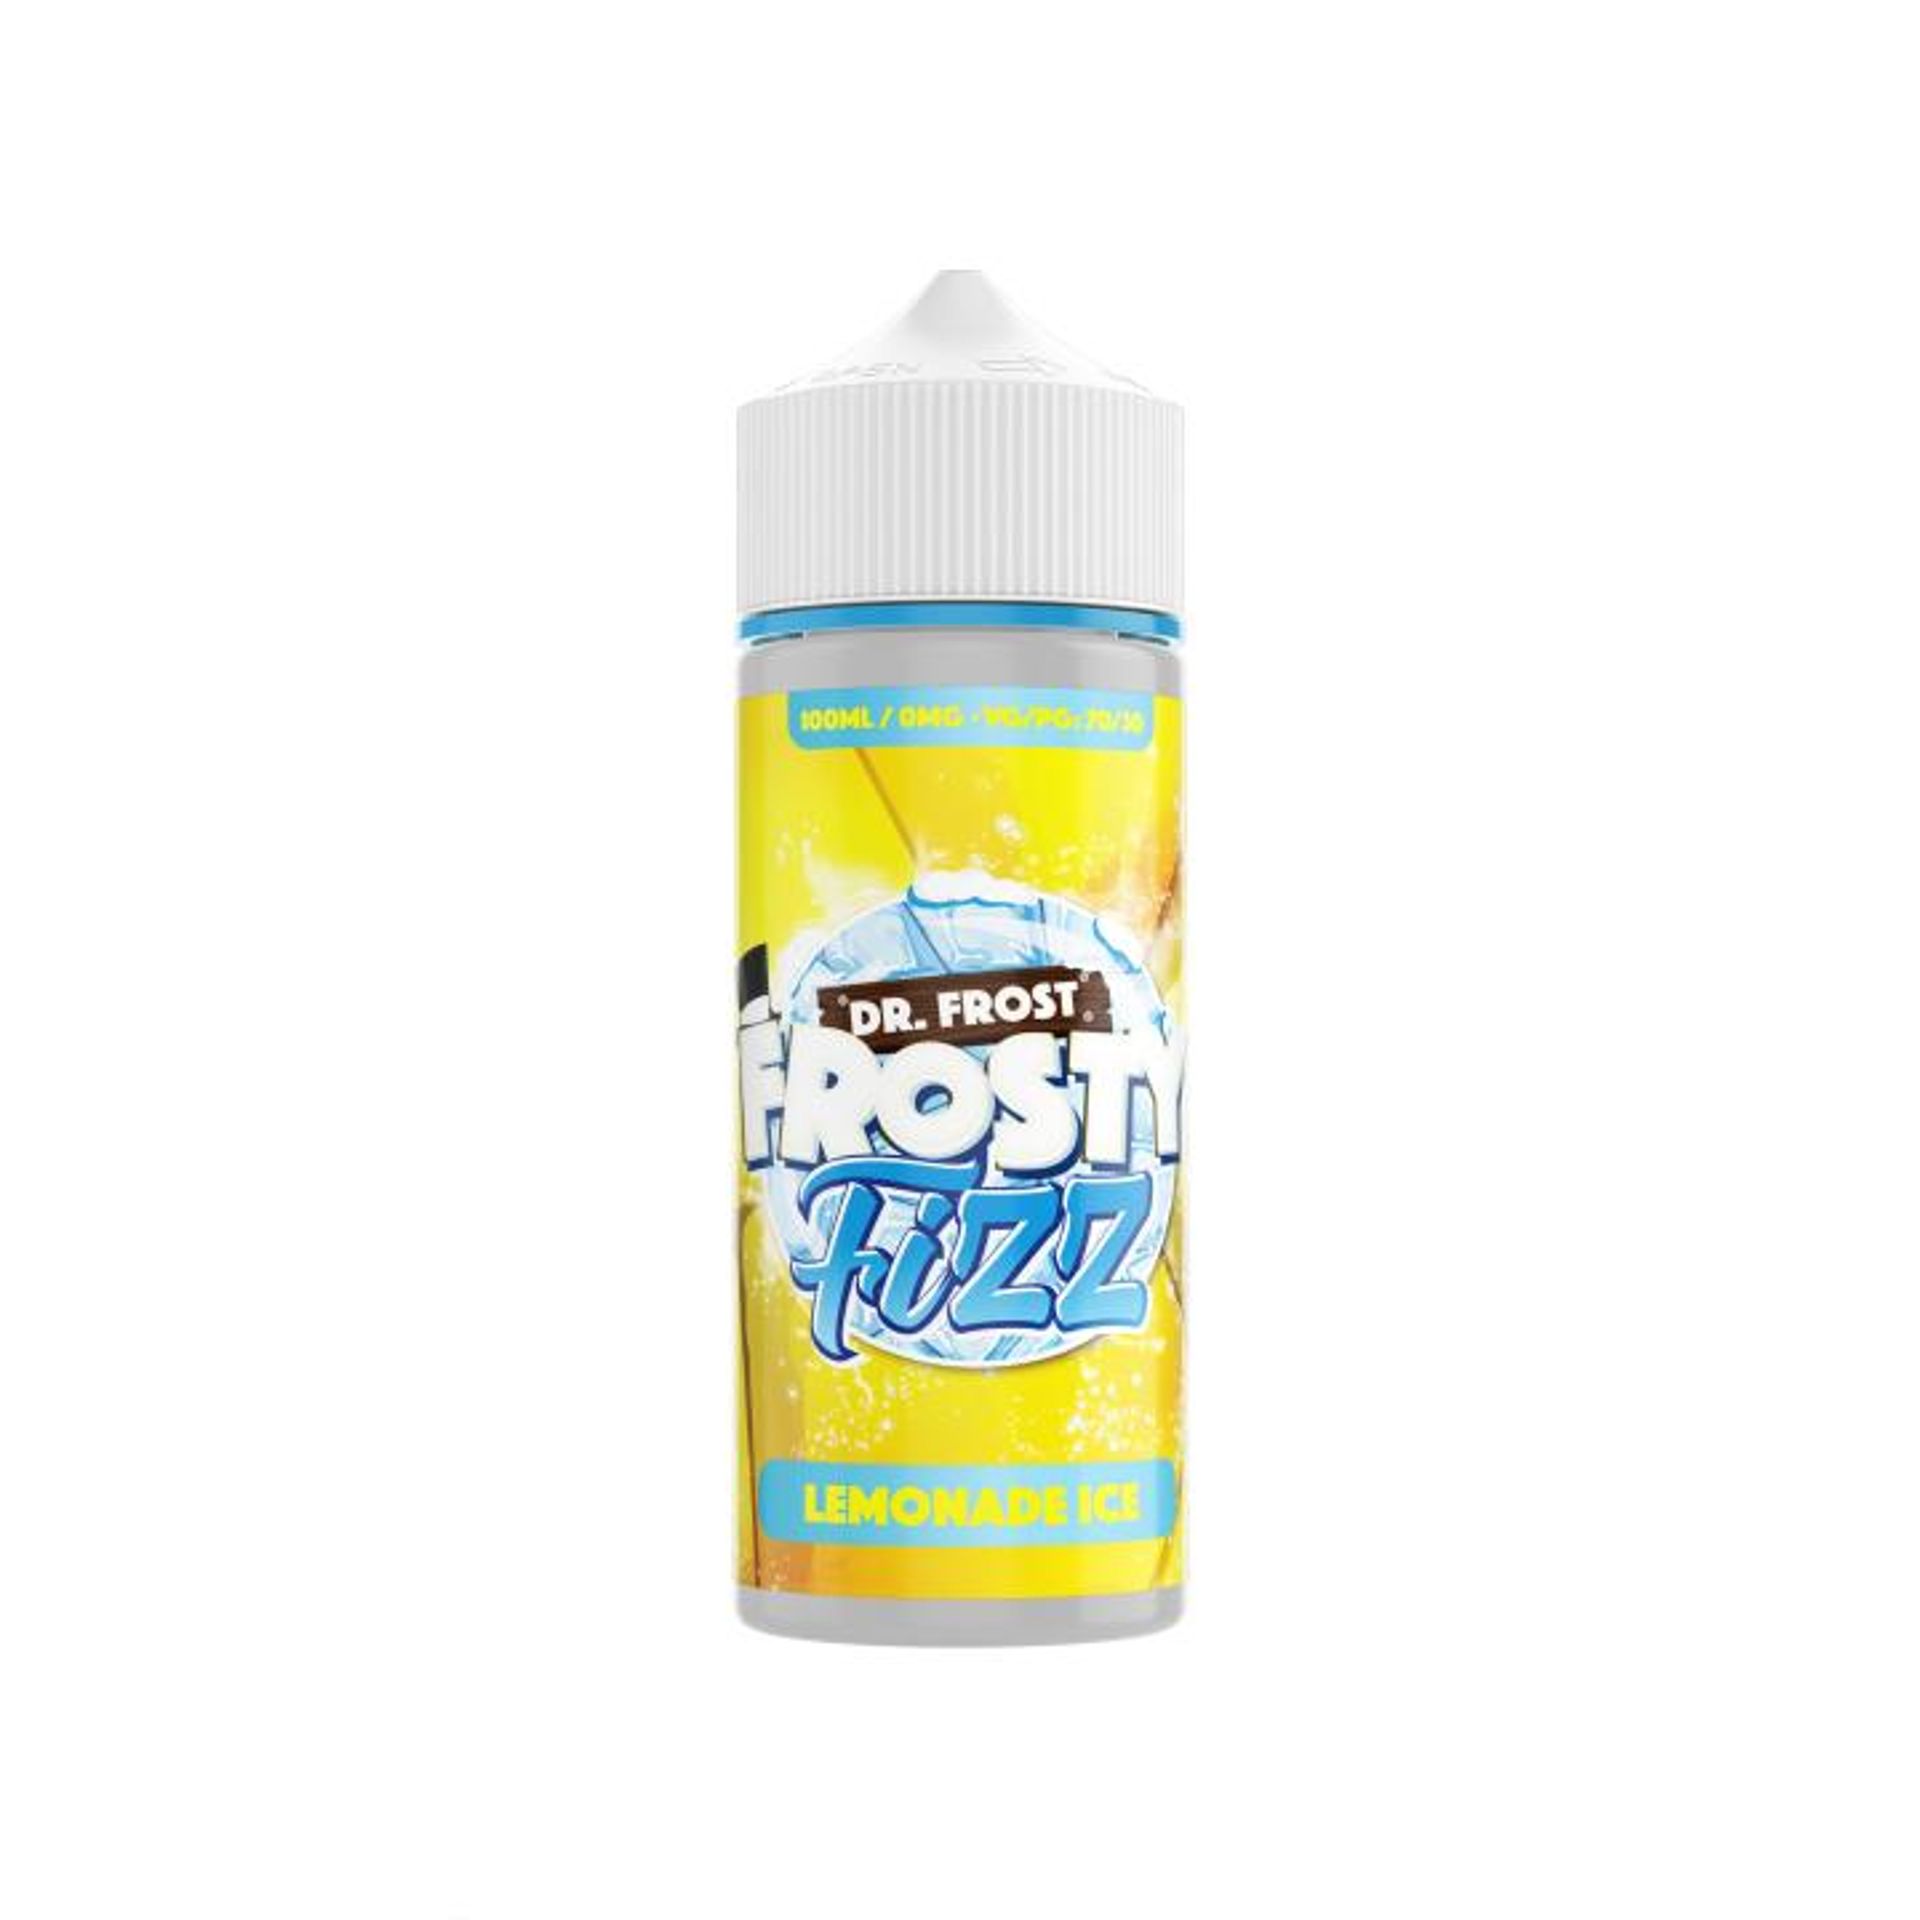 Image of Lemonade Ice Fizz by Dr Frost